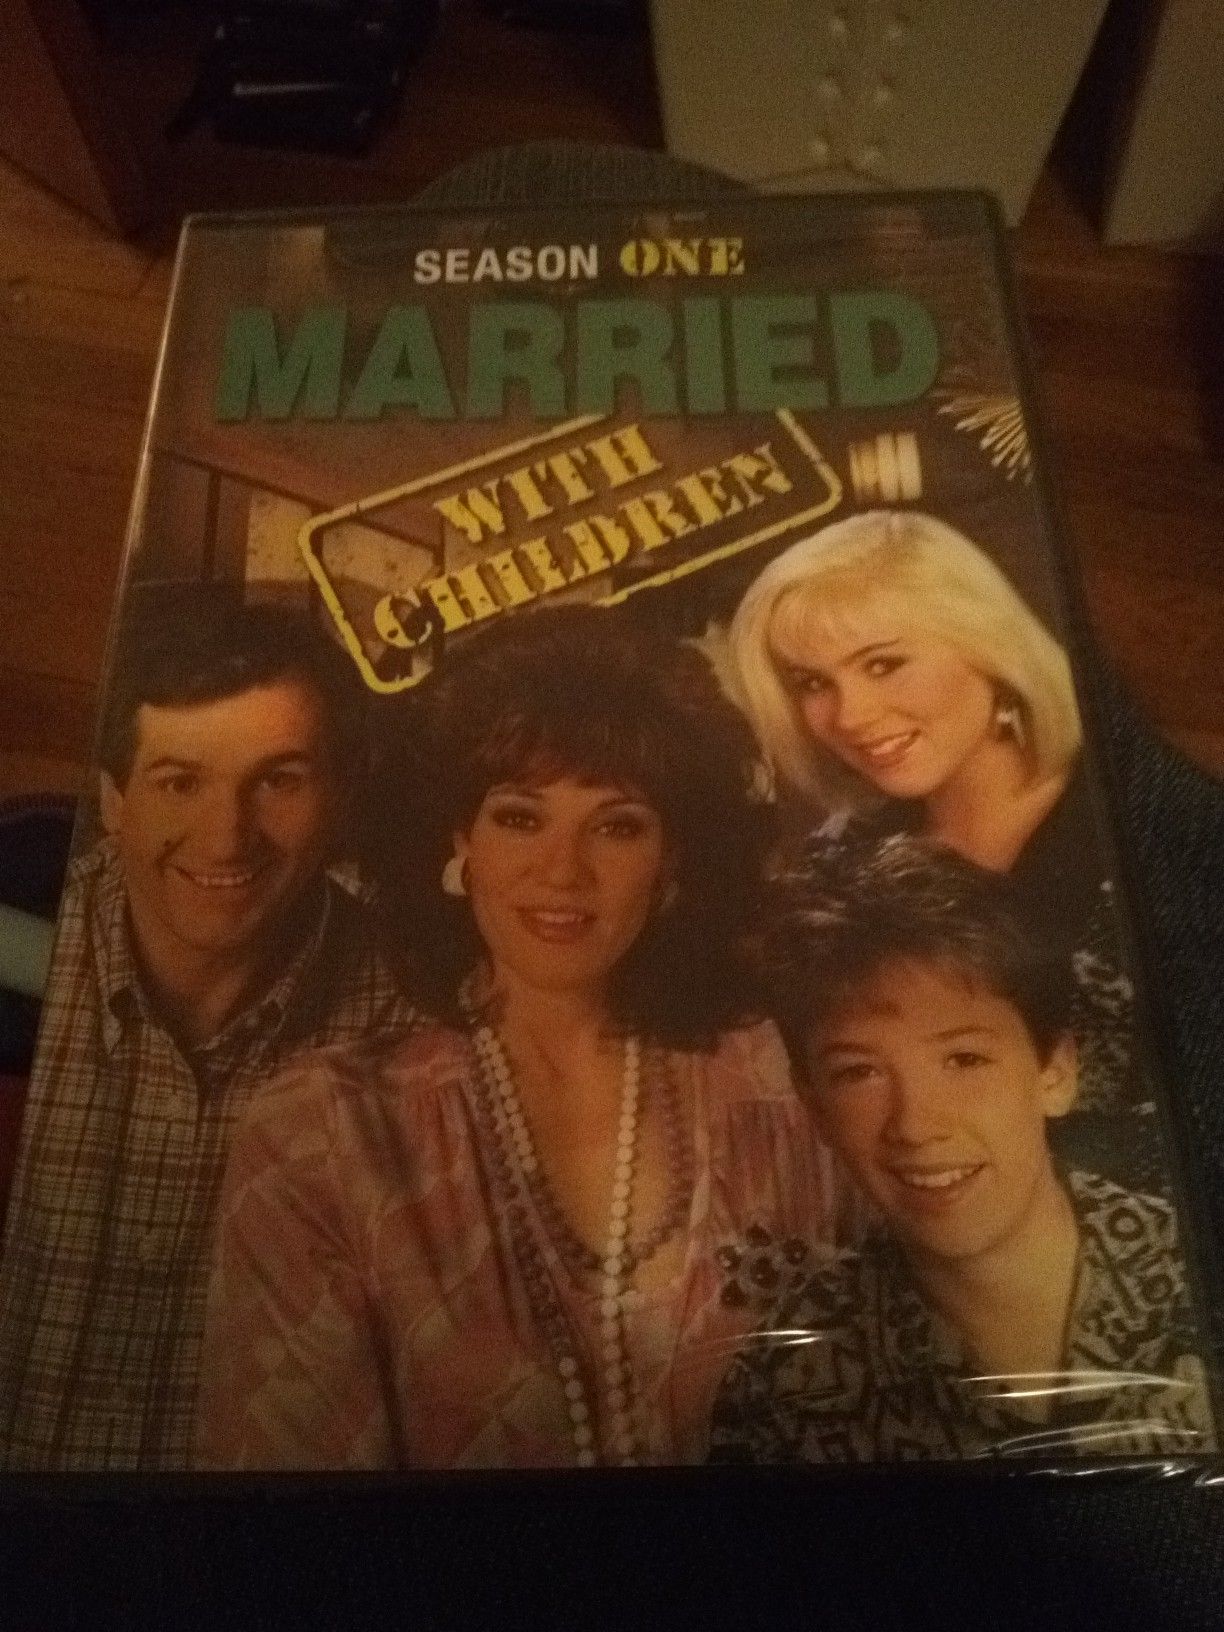 Married With Children Season 1 New Sealed